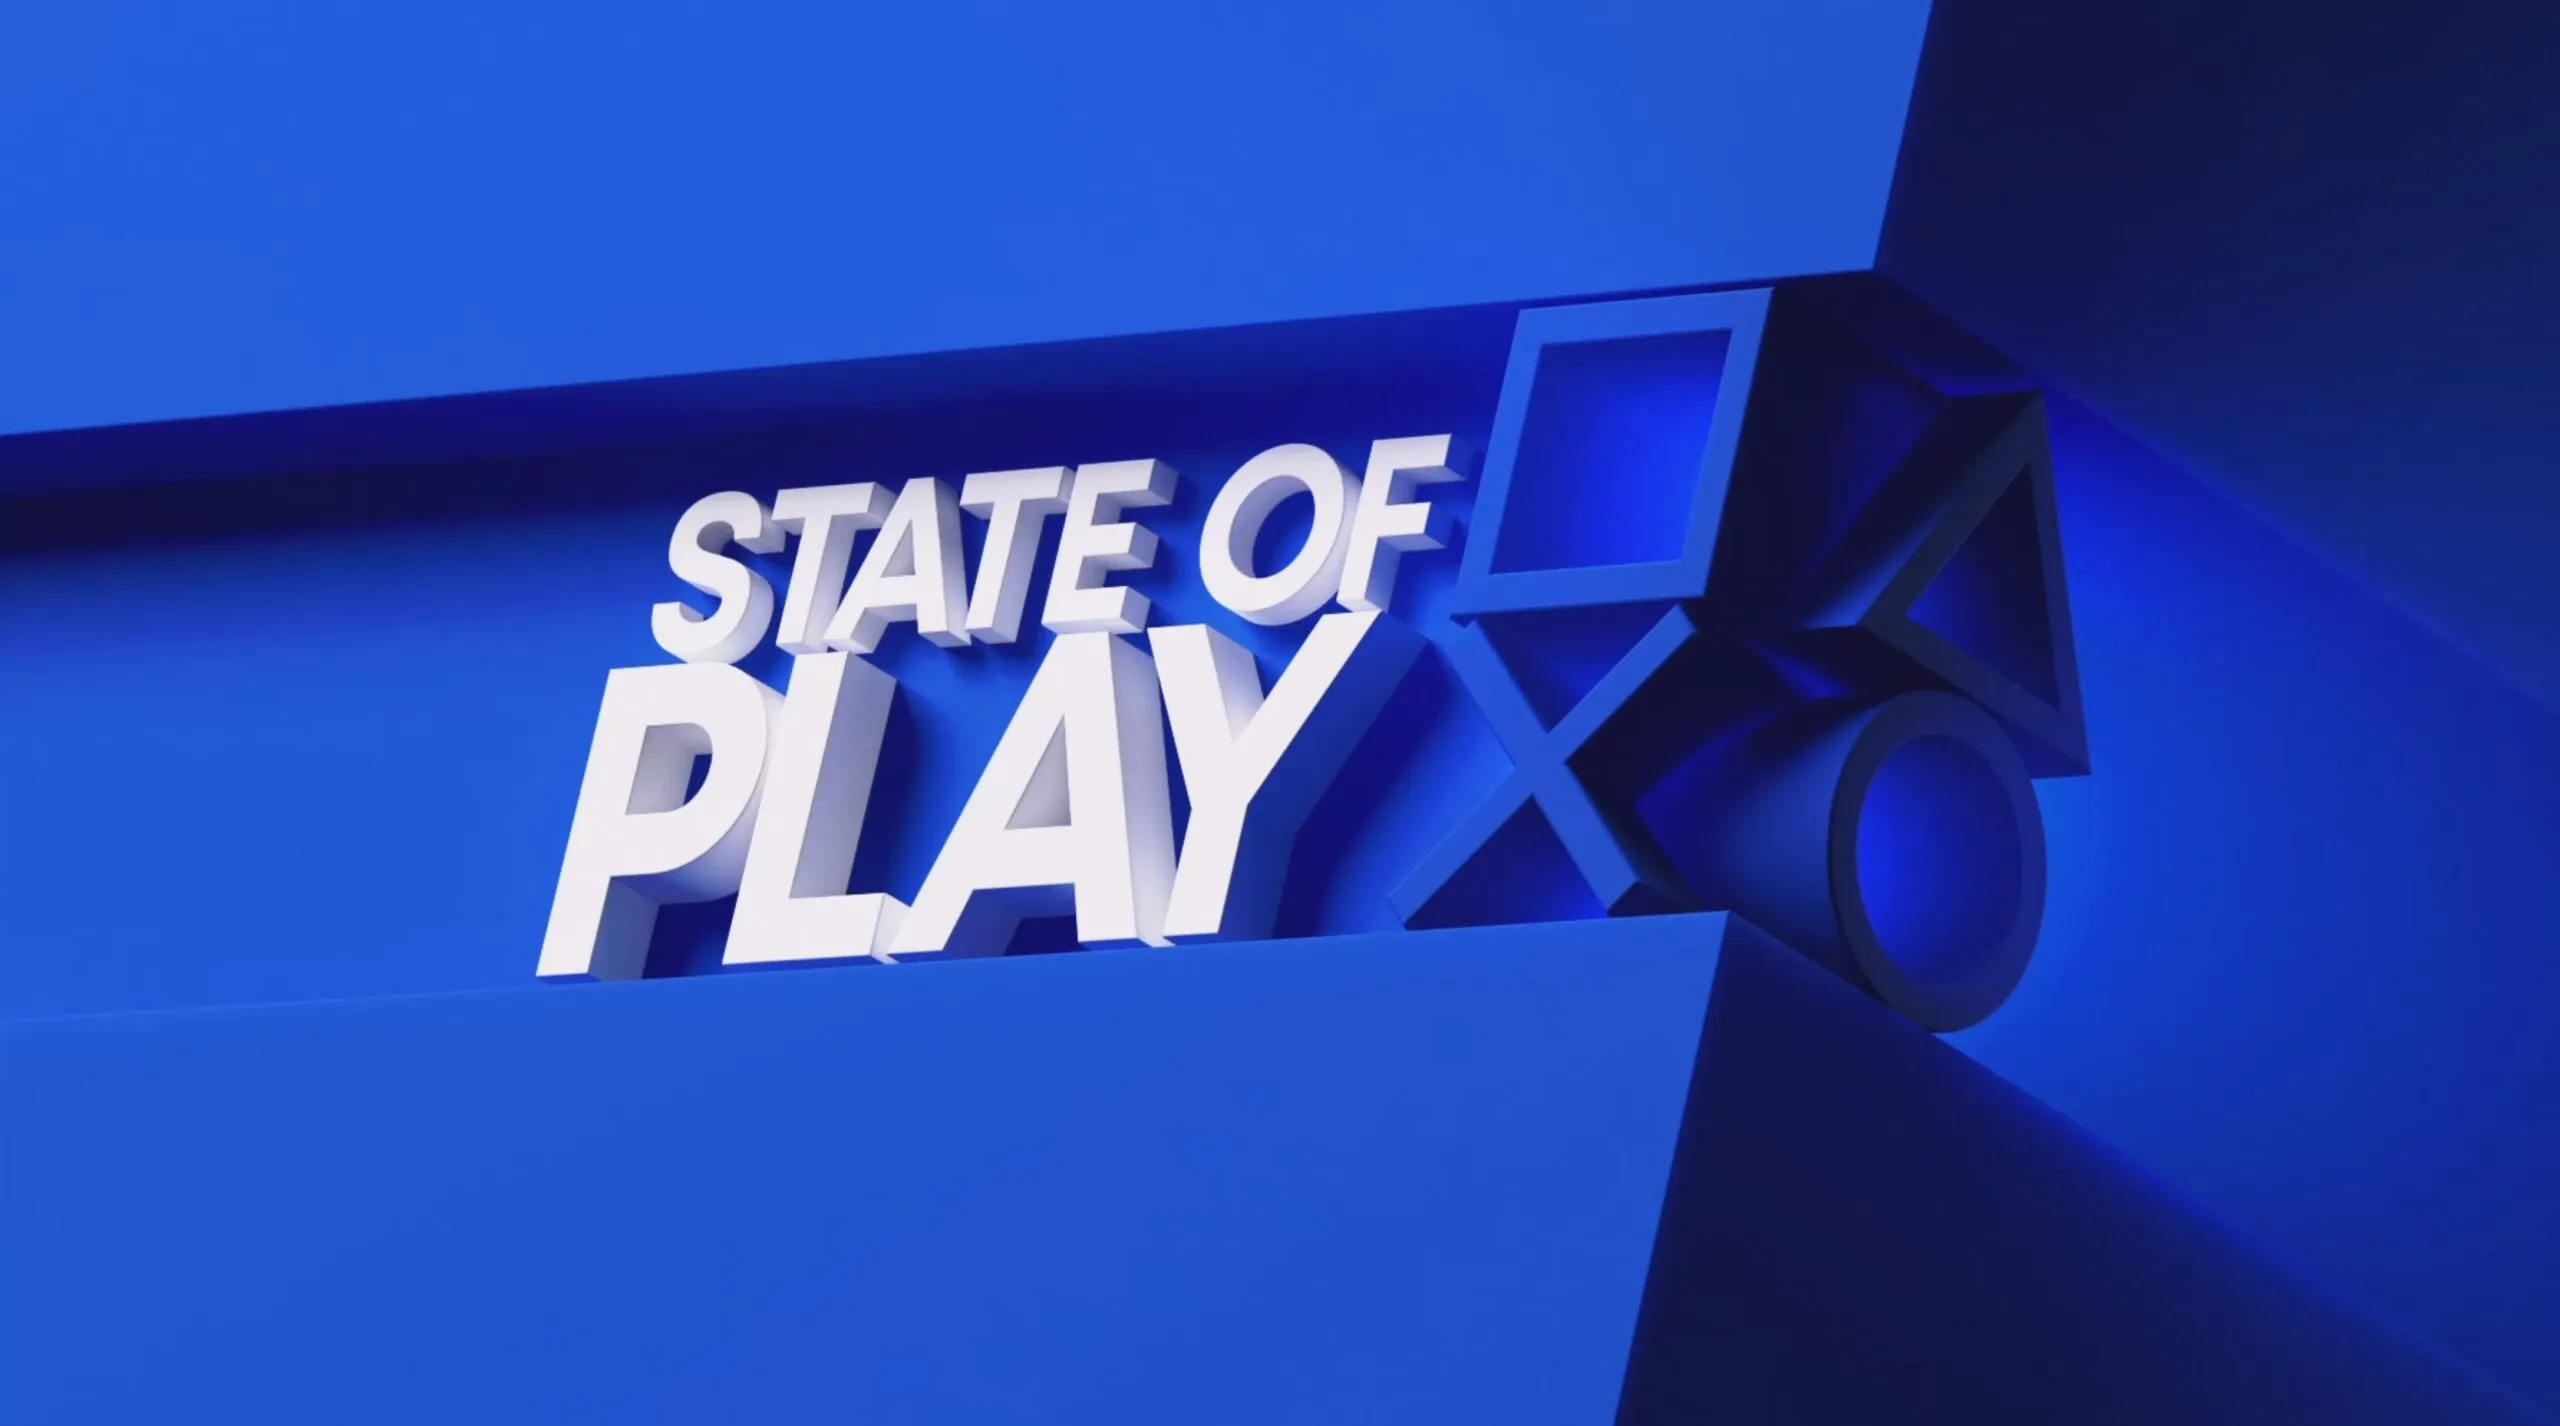 2560x1426 State of Play / Twenty PlayStation 5 wallpapers for fans RESPAWWN